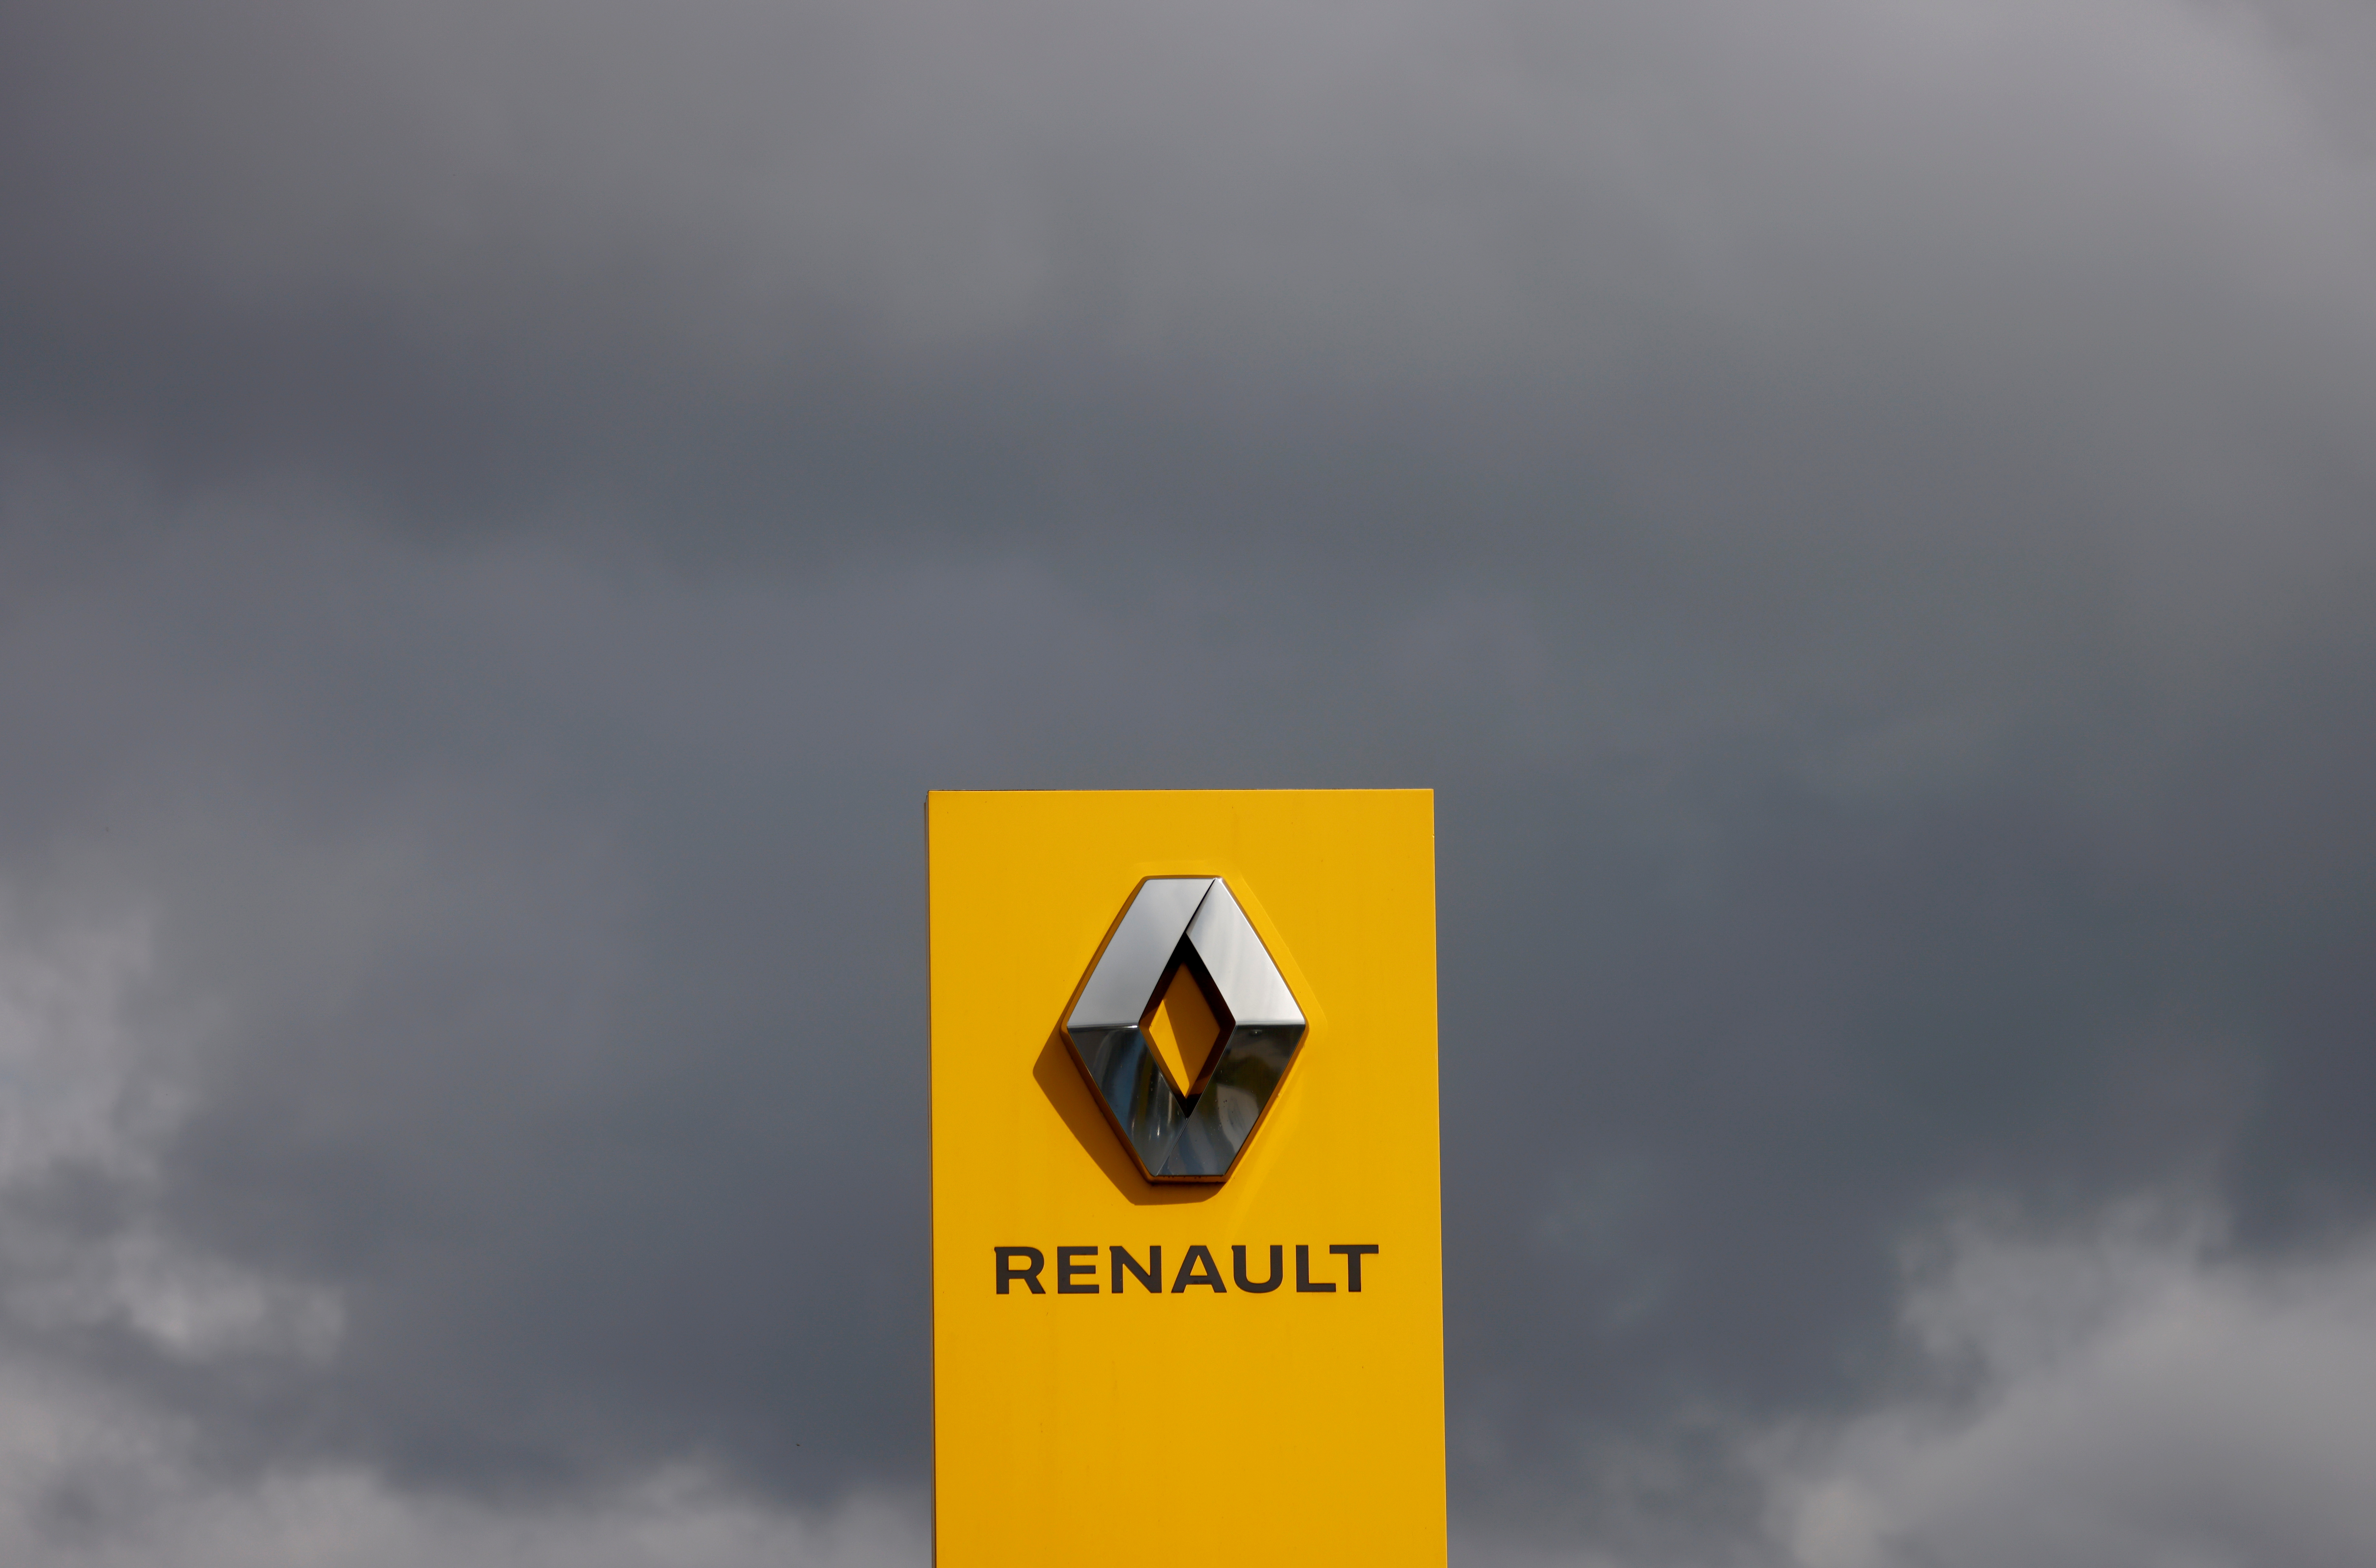 Logo of Renault carmaker is pictured at a dealership in Les Sorinieres